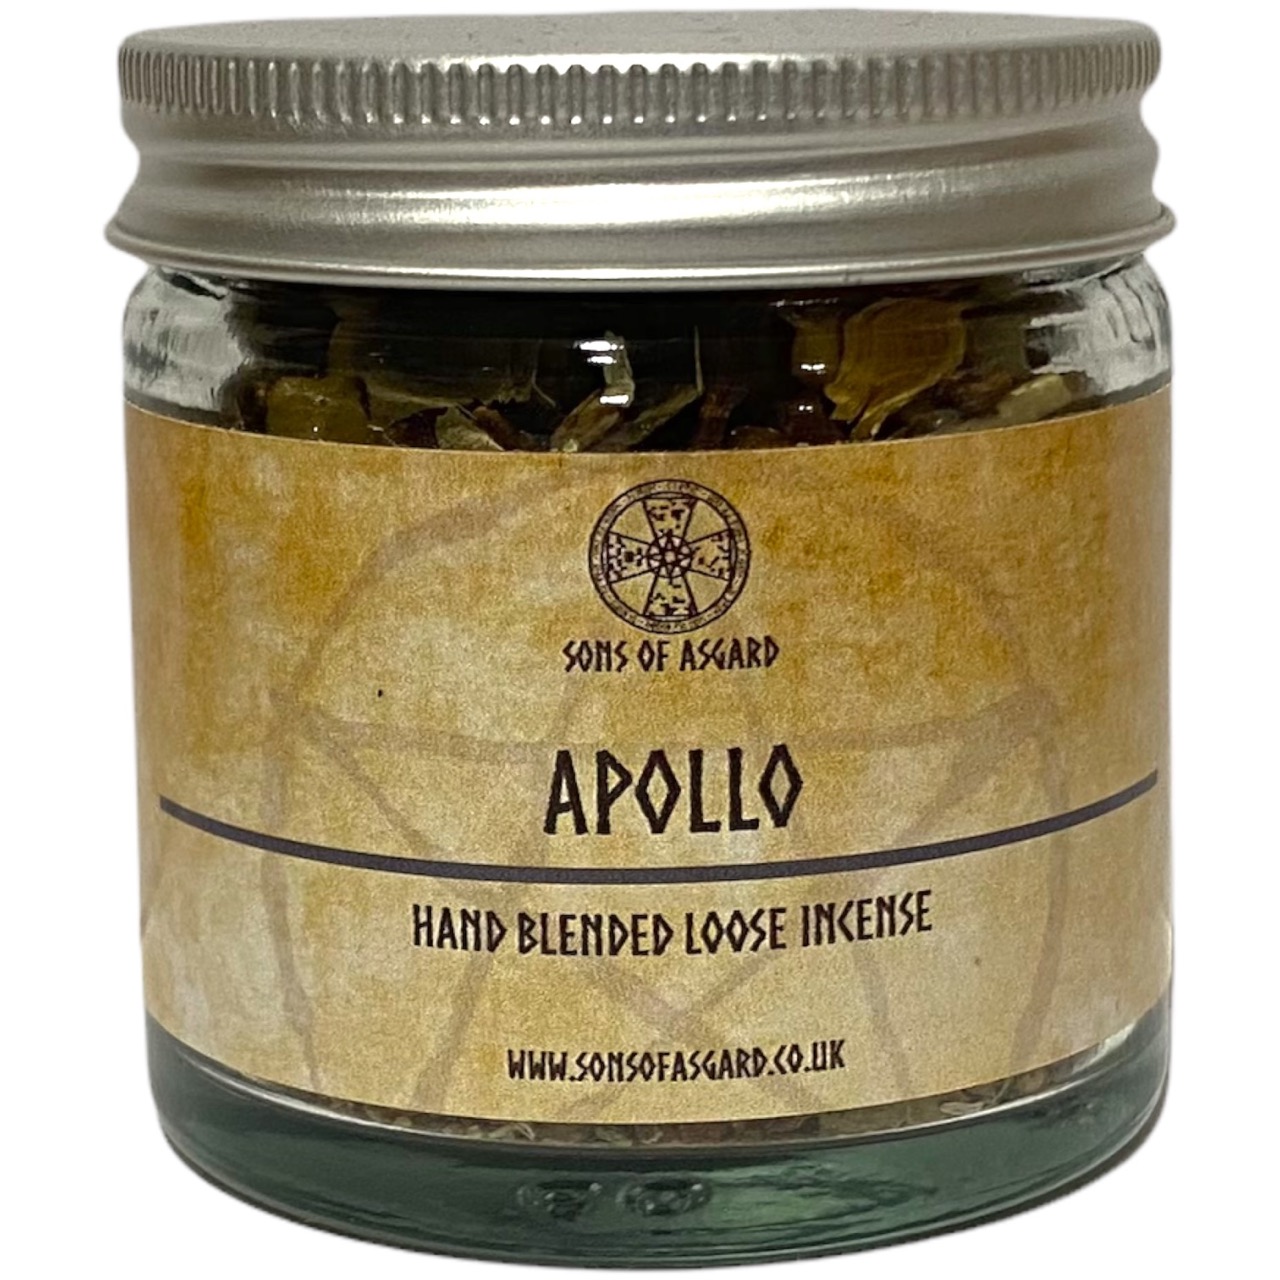 Apollo - Blended Loose Incense